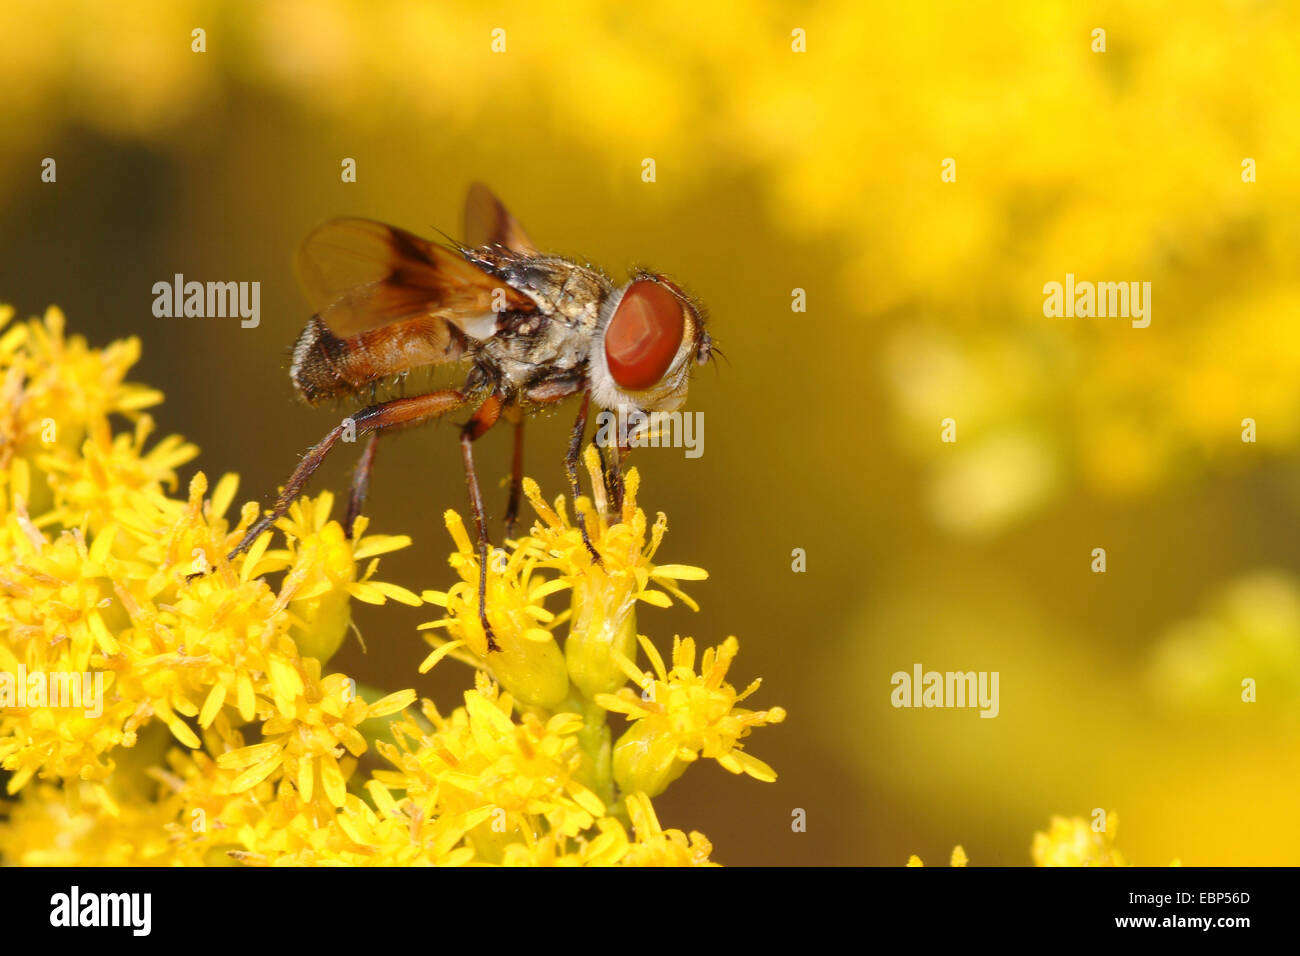 Parasite fly, Tachinid Fly (Ectophasia crassipennis), on yellow flowers, Germany Stock Photo